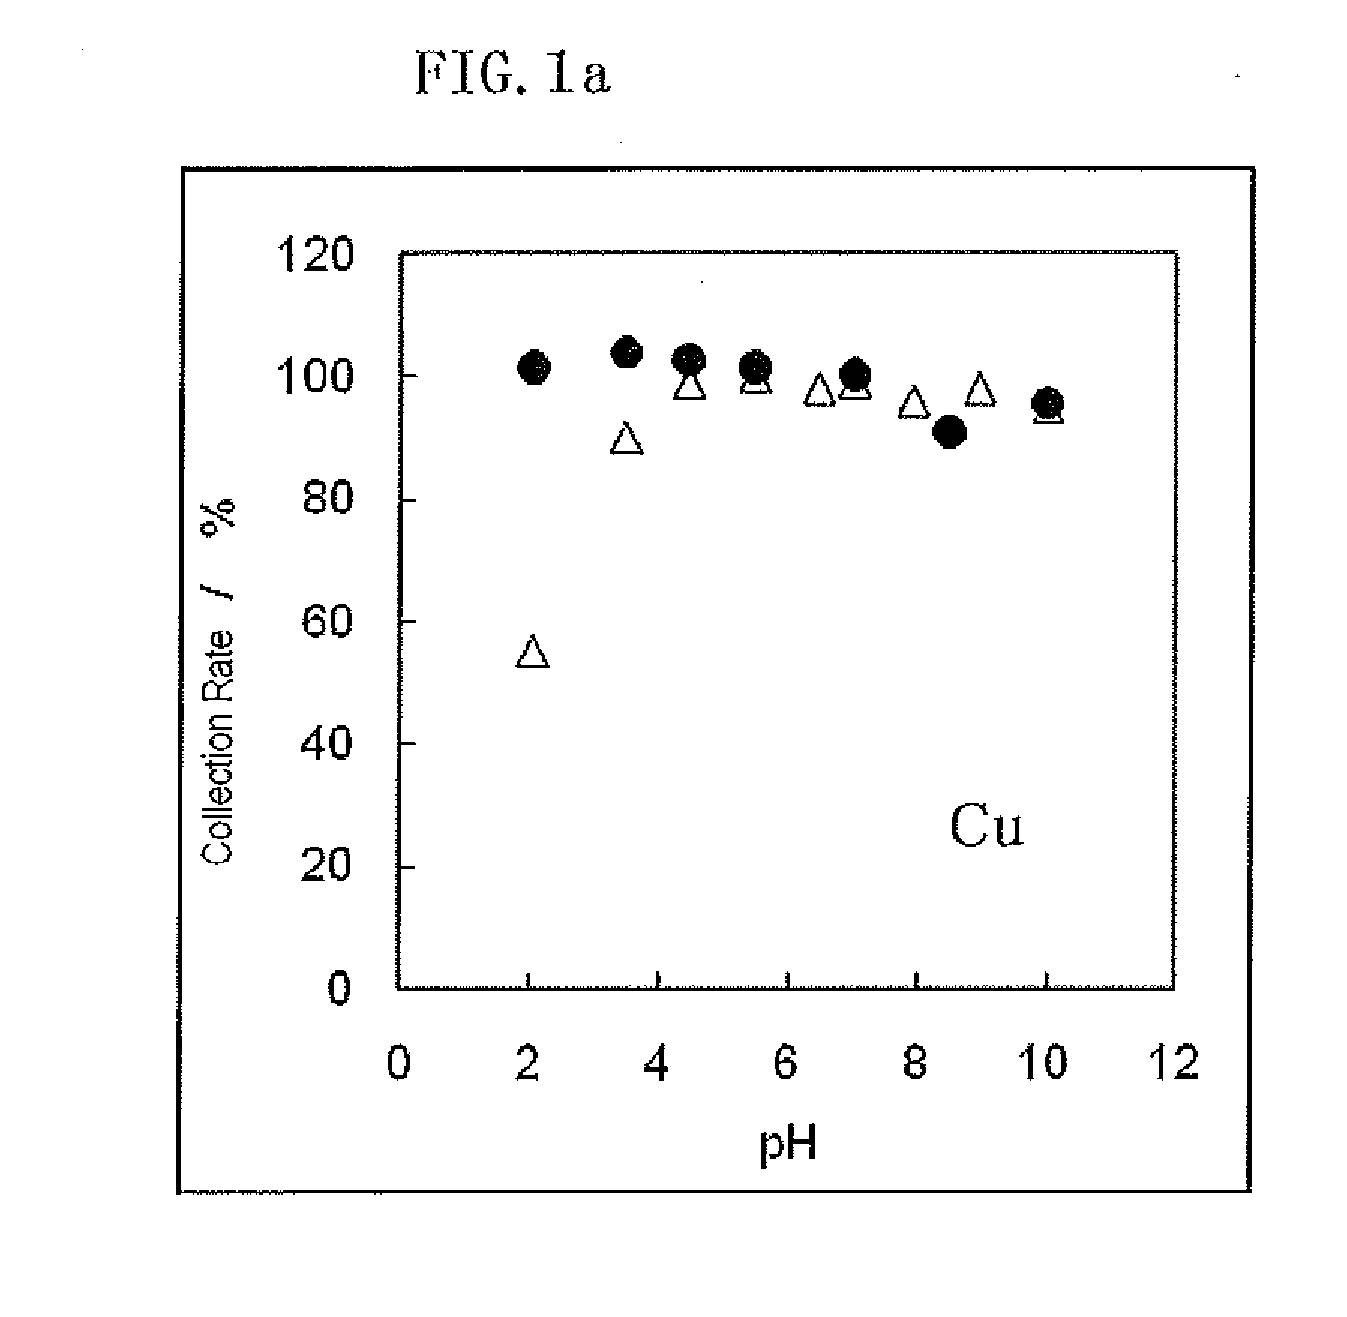 Metal adsorbent containing chelating polymer